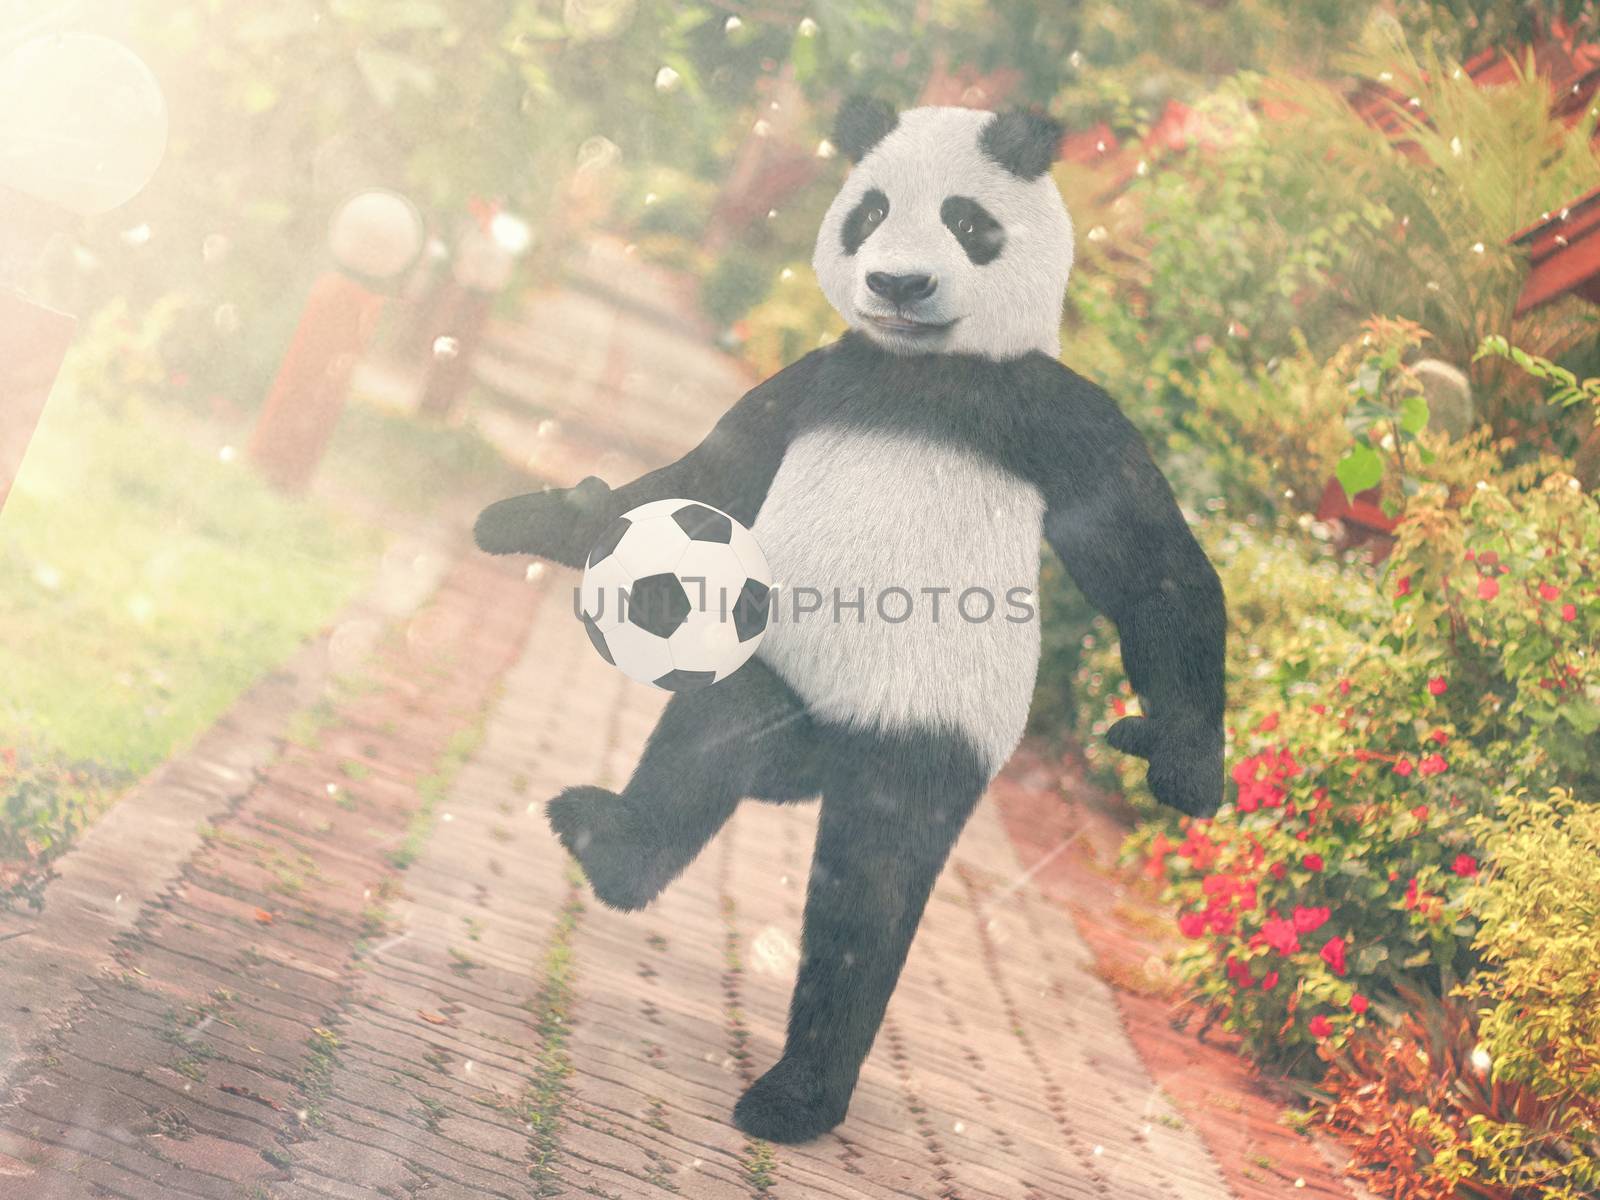 Panda football player. chasing soccer ball foot against backdrop Resort Thailand. juggling ball bear. character background paving stones road stretching into distance. edges with red tropical flowers.